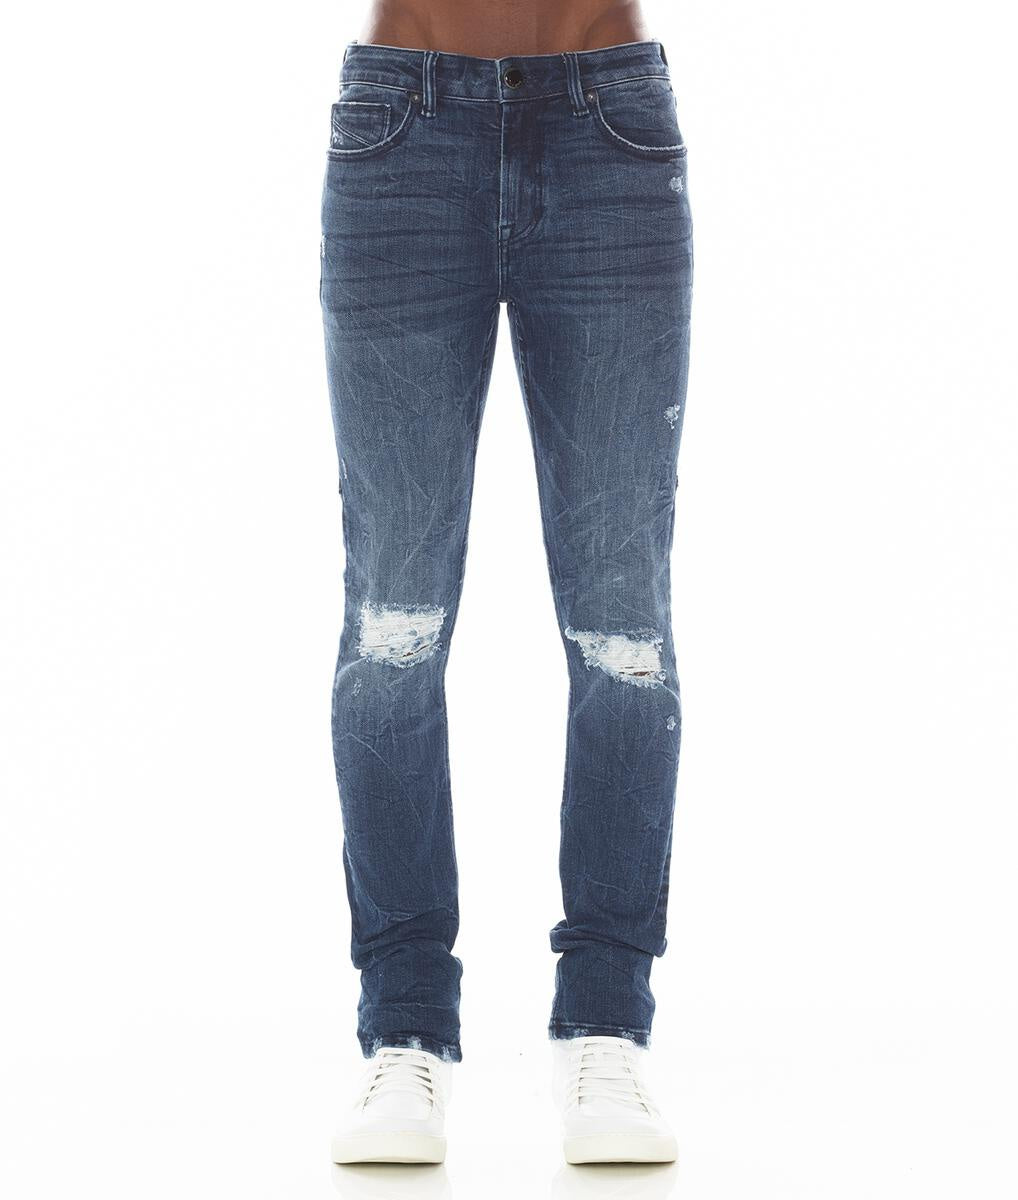 Jeans, Skinny Jeans, Blue Jeans, HVMAN, Men, Boys, Teens, Gifts, Wmns, Girls,Urban, Style, Fashion, Ripped Jeans